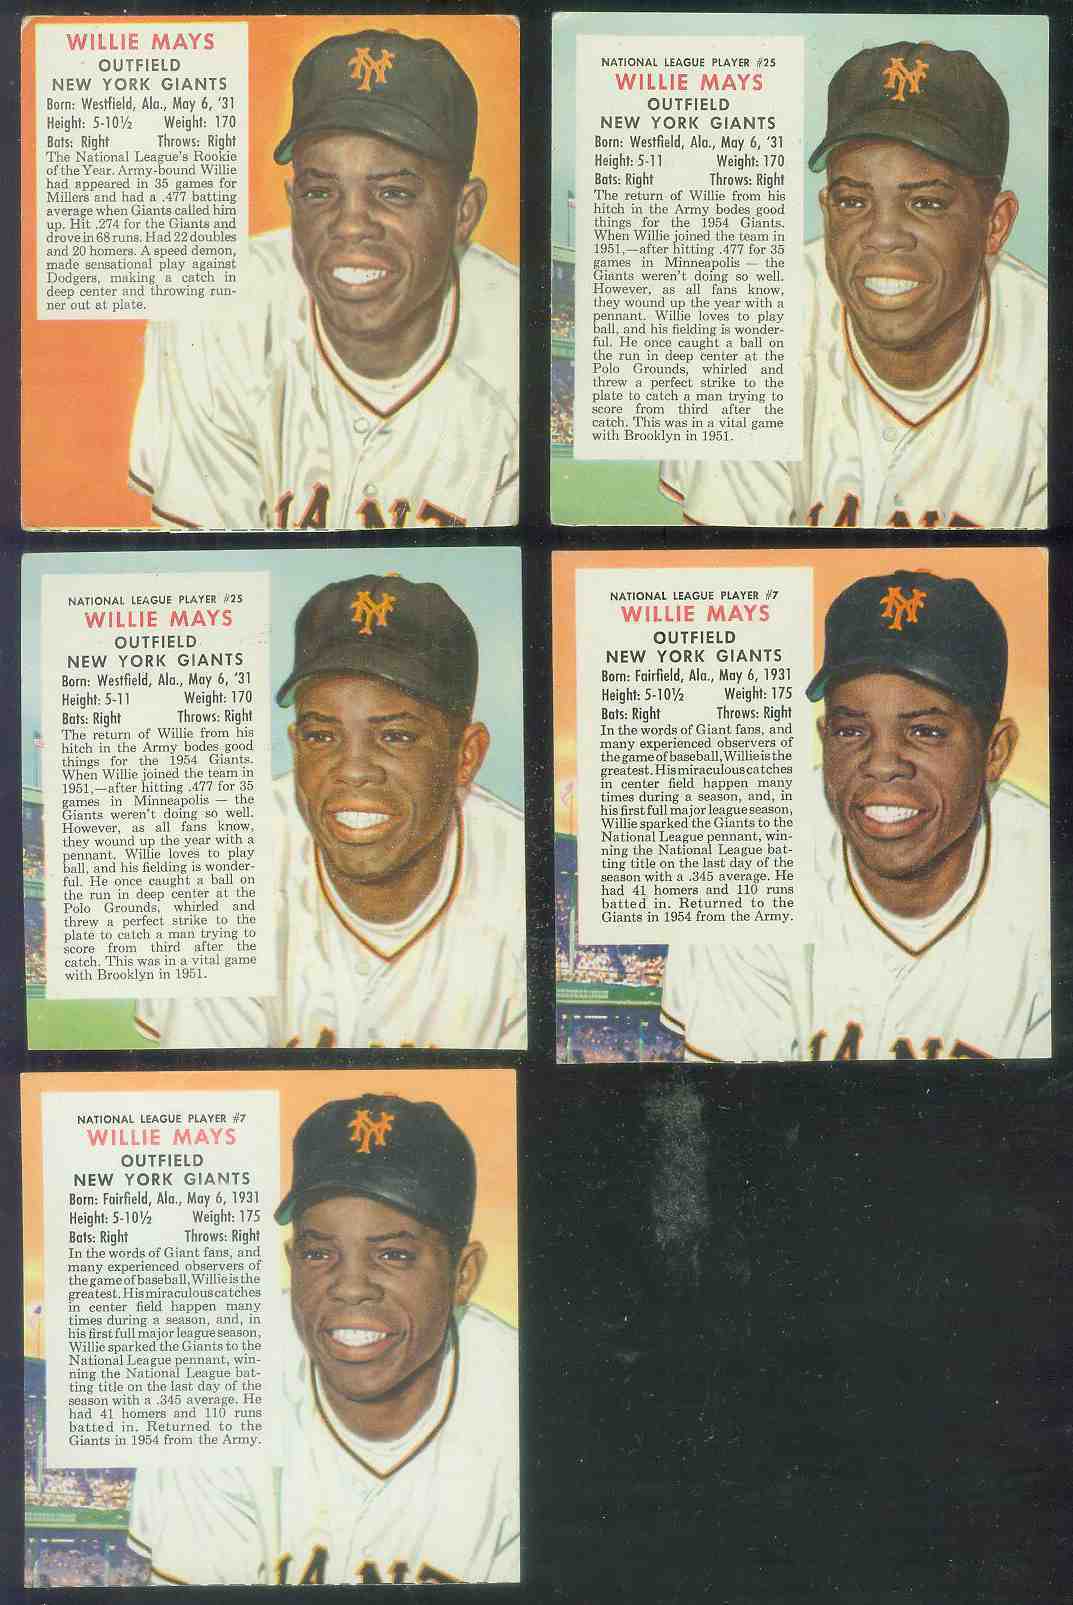 1954 Red Man #NL25 Willie Mays (Giants) Baseball cards value